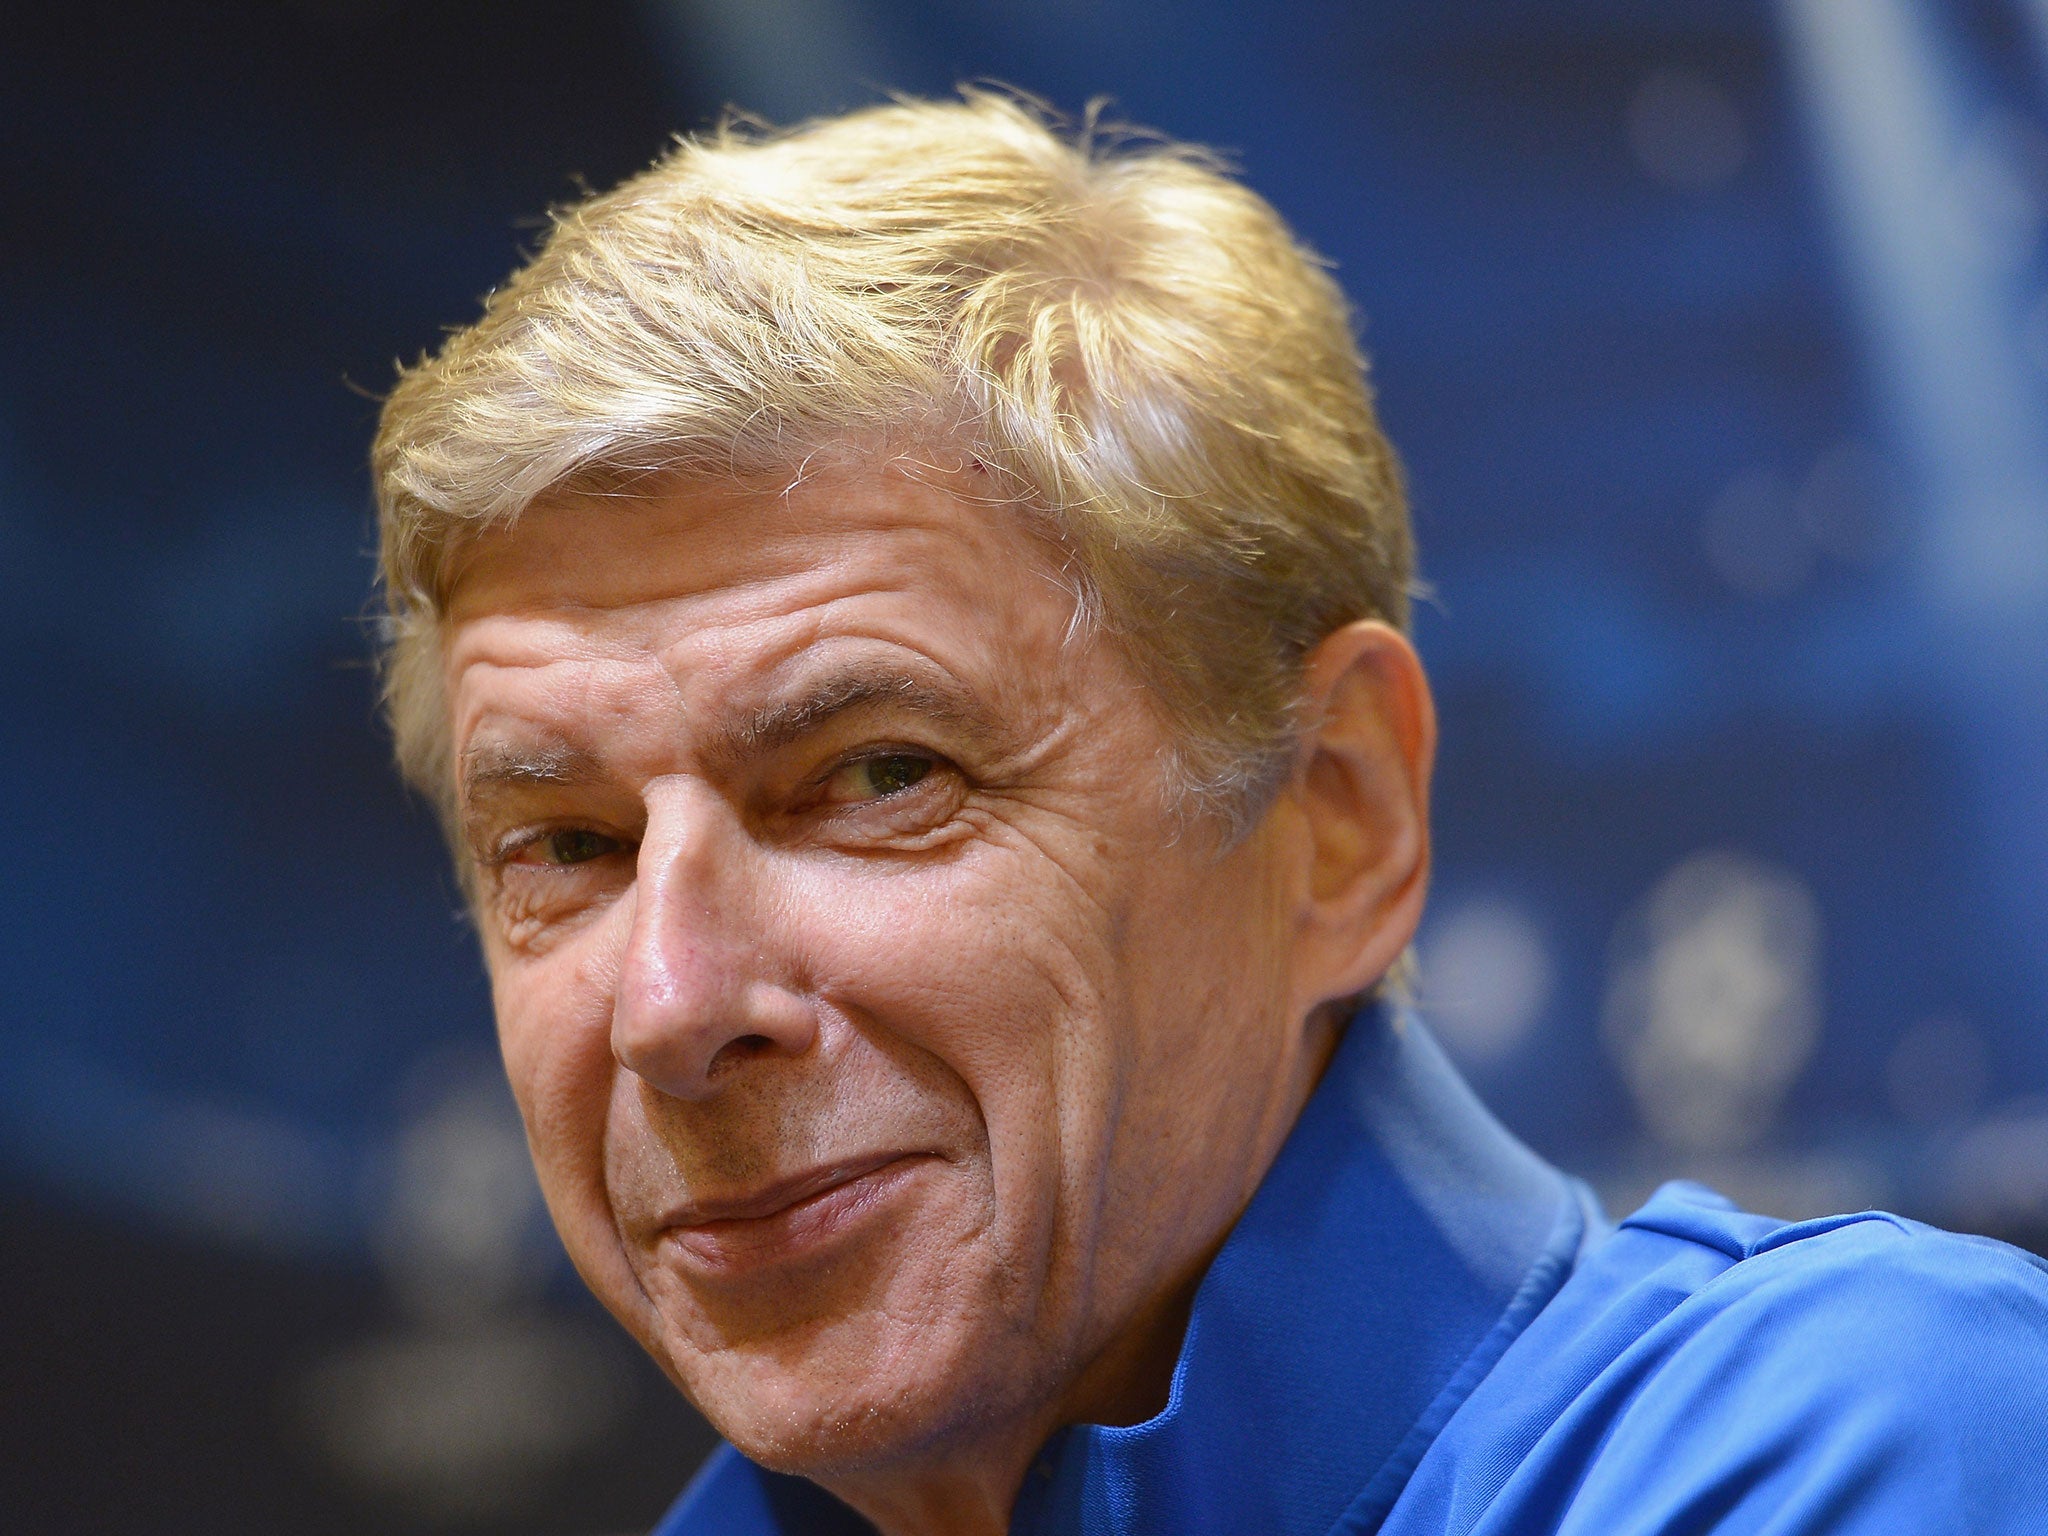 Arsenal manager Arsene Wenger hints at a smile during his press conference